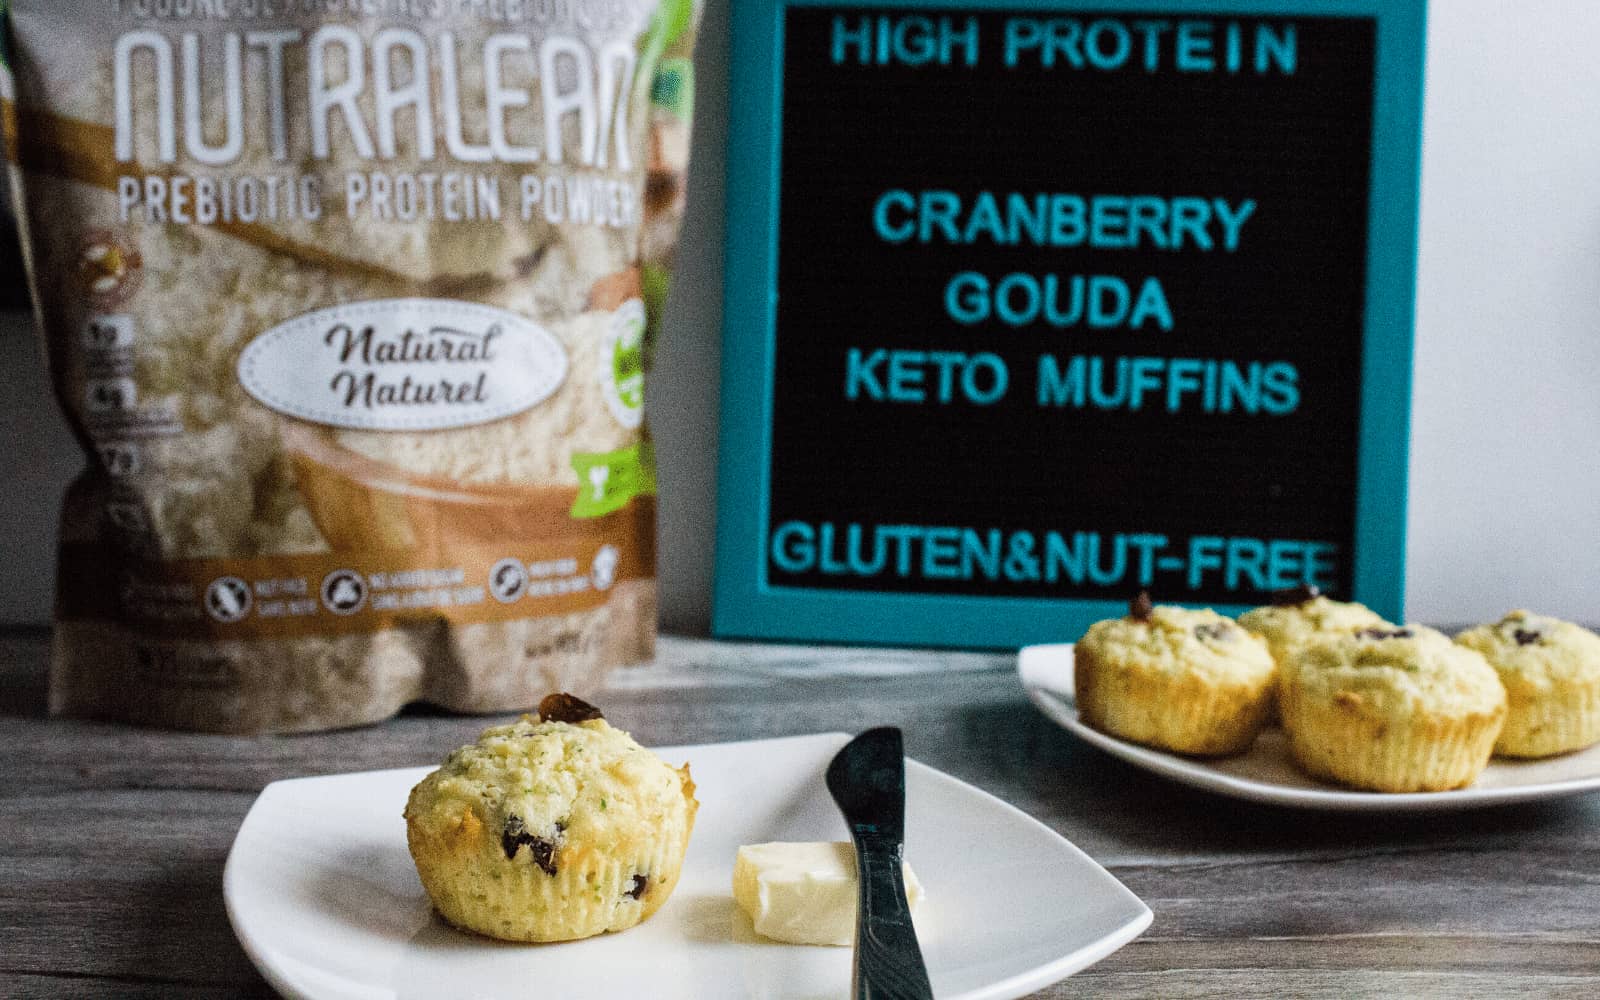 Gluten-Free Cranberry Gouda Keto Muffins - Nutracelle